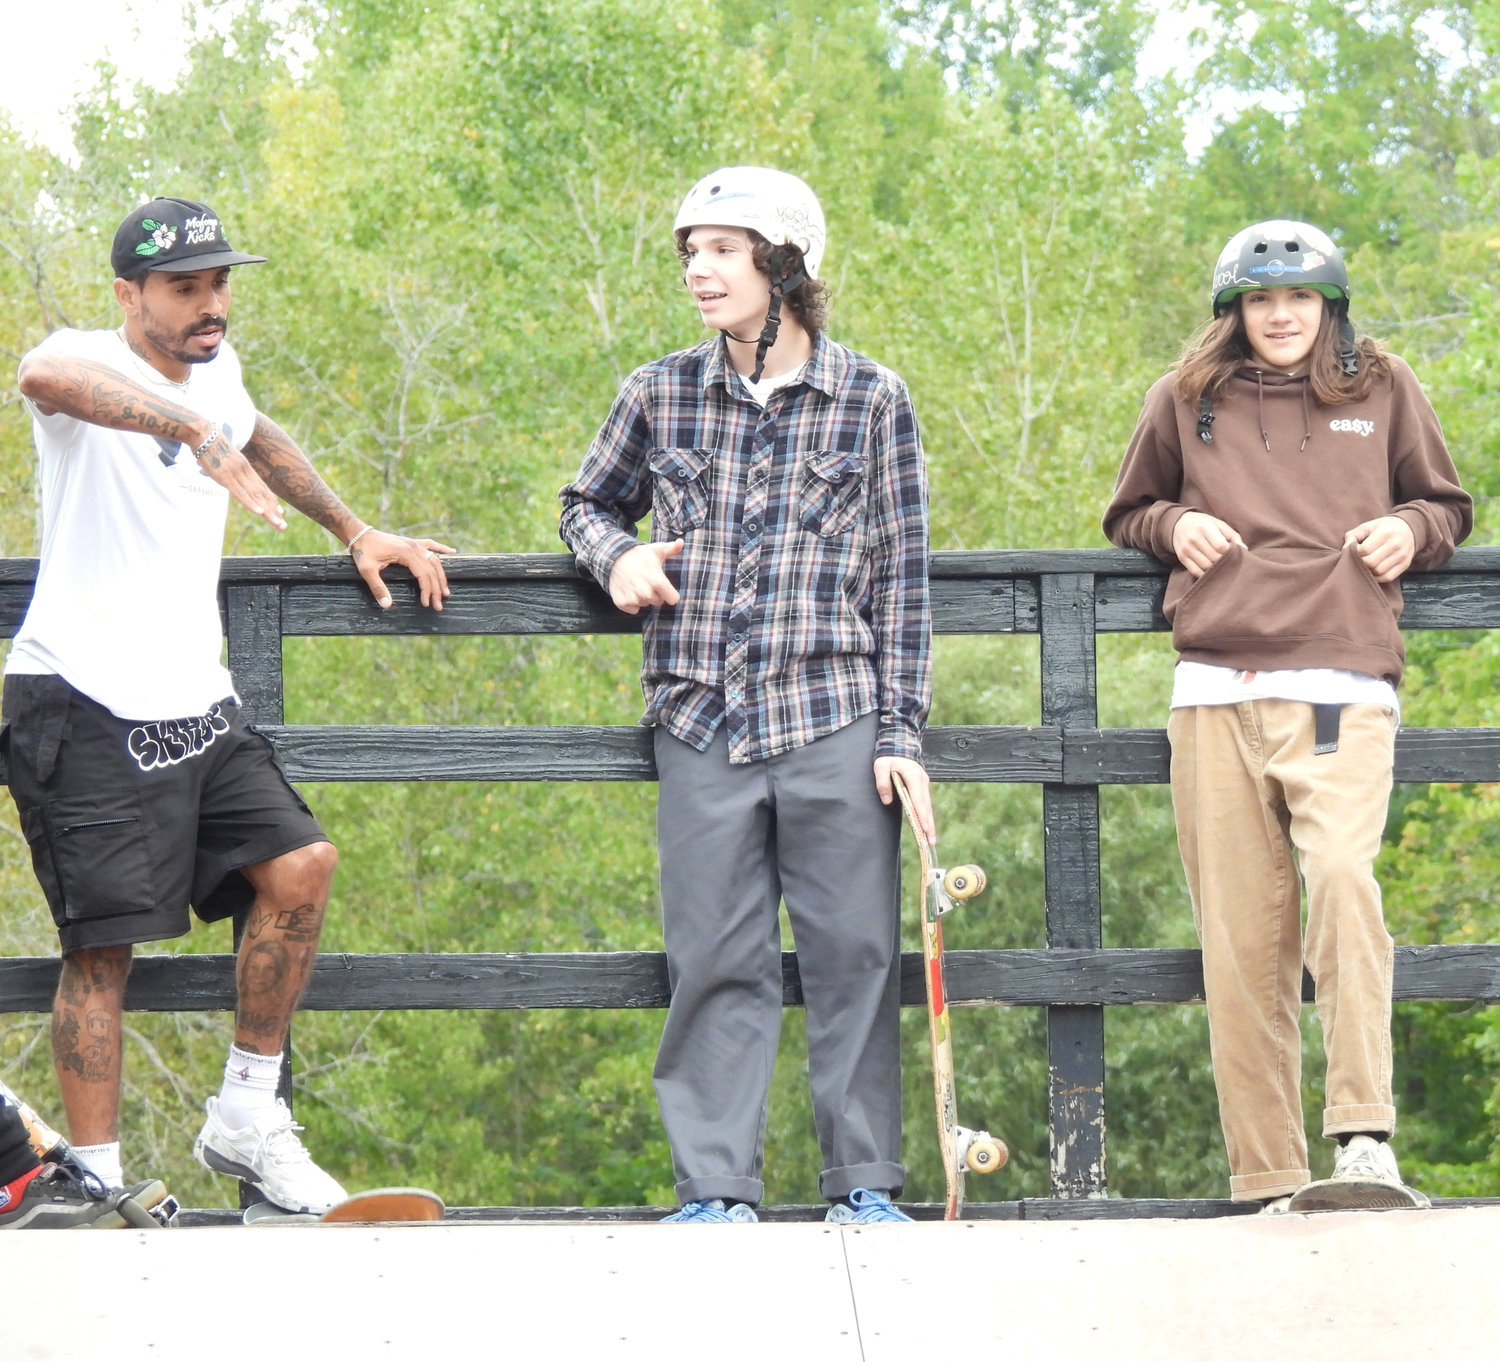 Emanuel “Manny” Santiago shares some skateboarding tips with some fellow enthusiasts of the sport at the Lenox Skate Park on Saturday, Sept. 24. Santiago, an Olympian and professional skateboarder, was in Canastota as part of his efforts to support youth development.